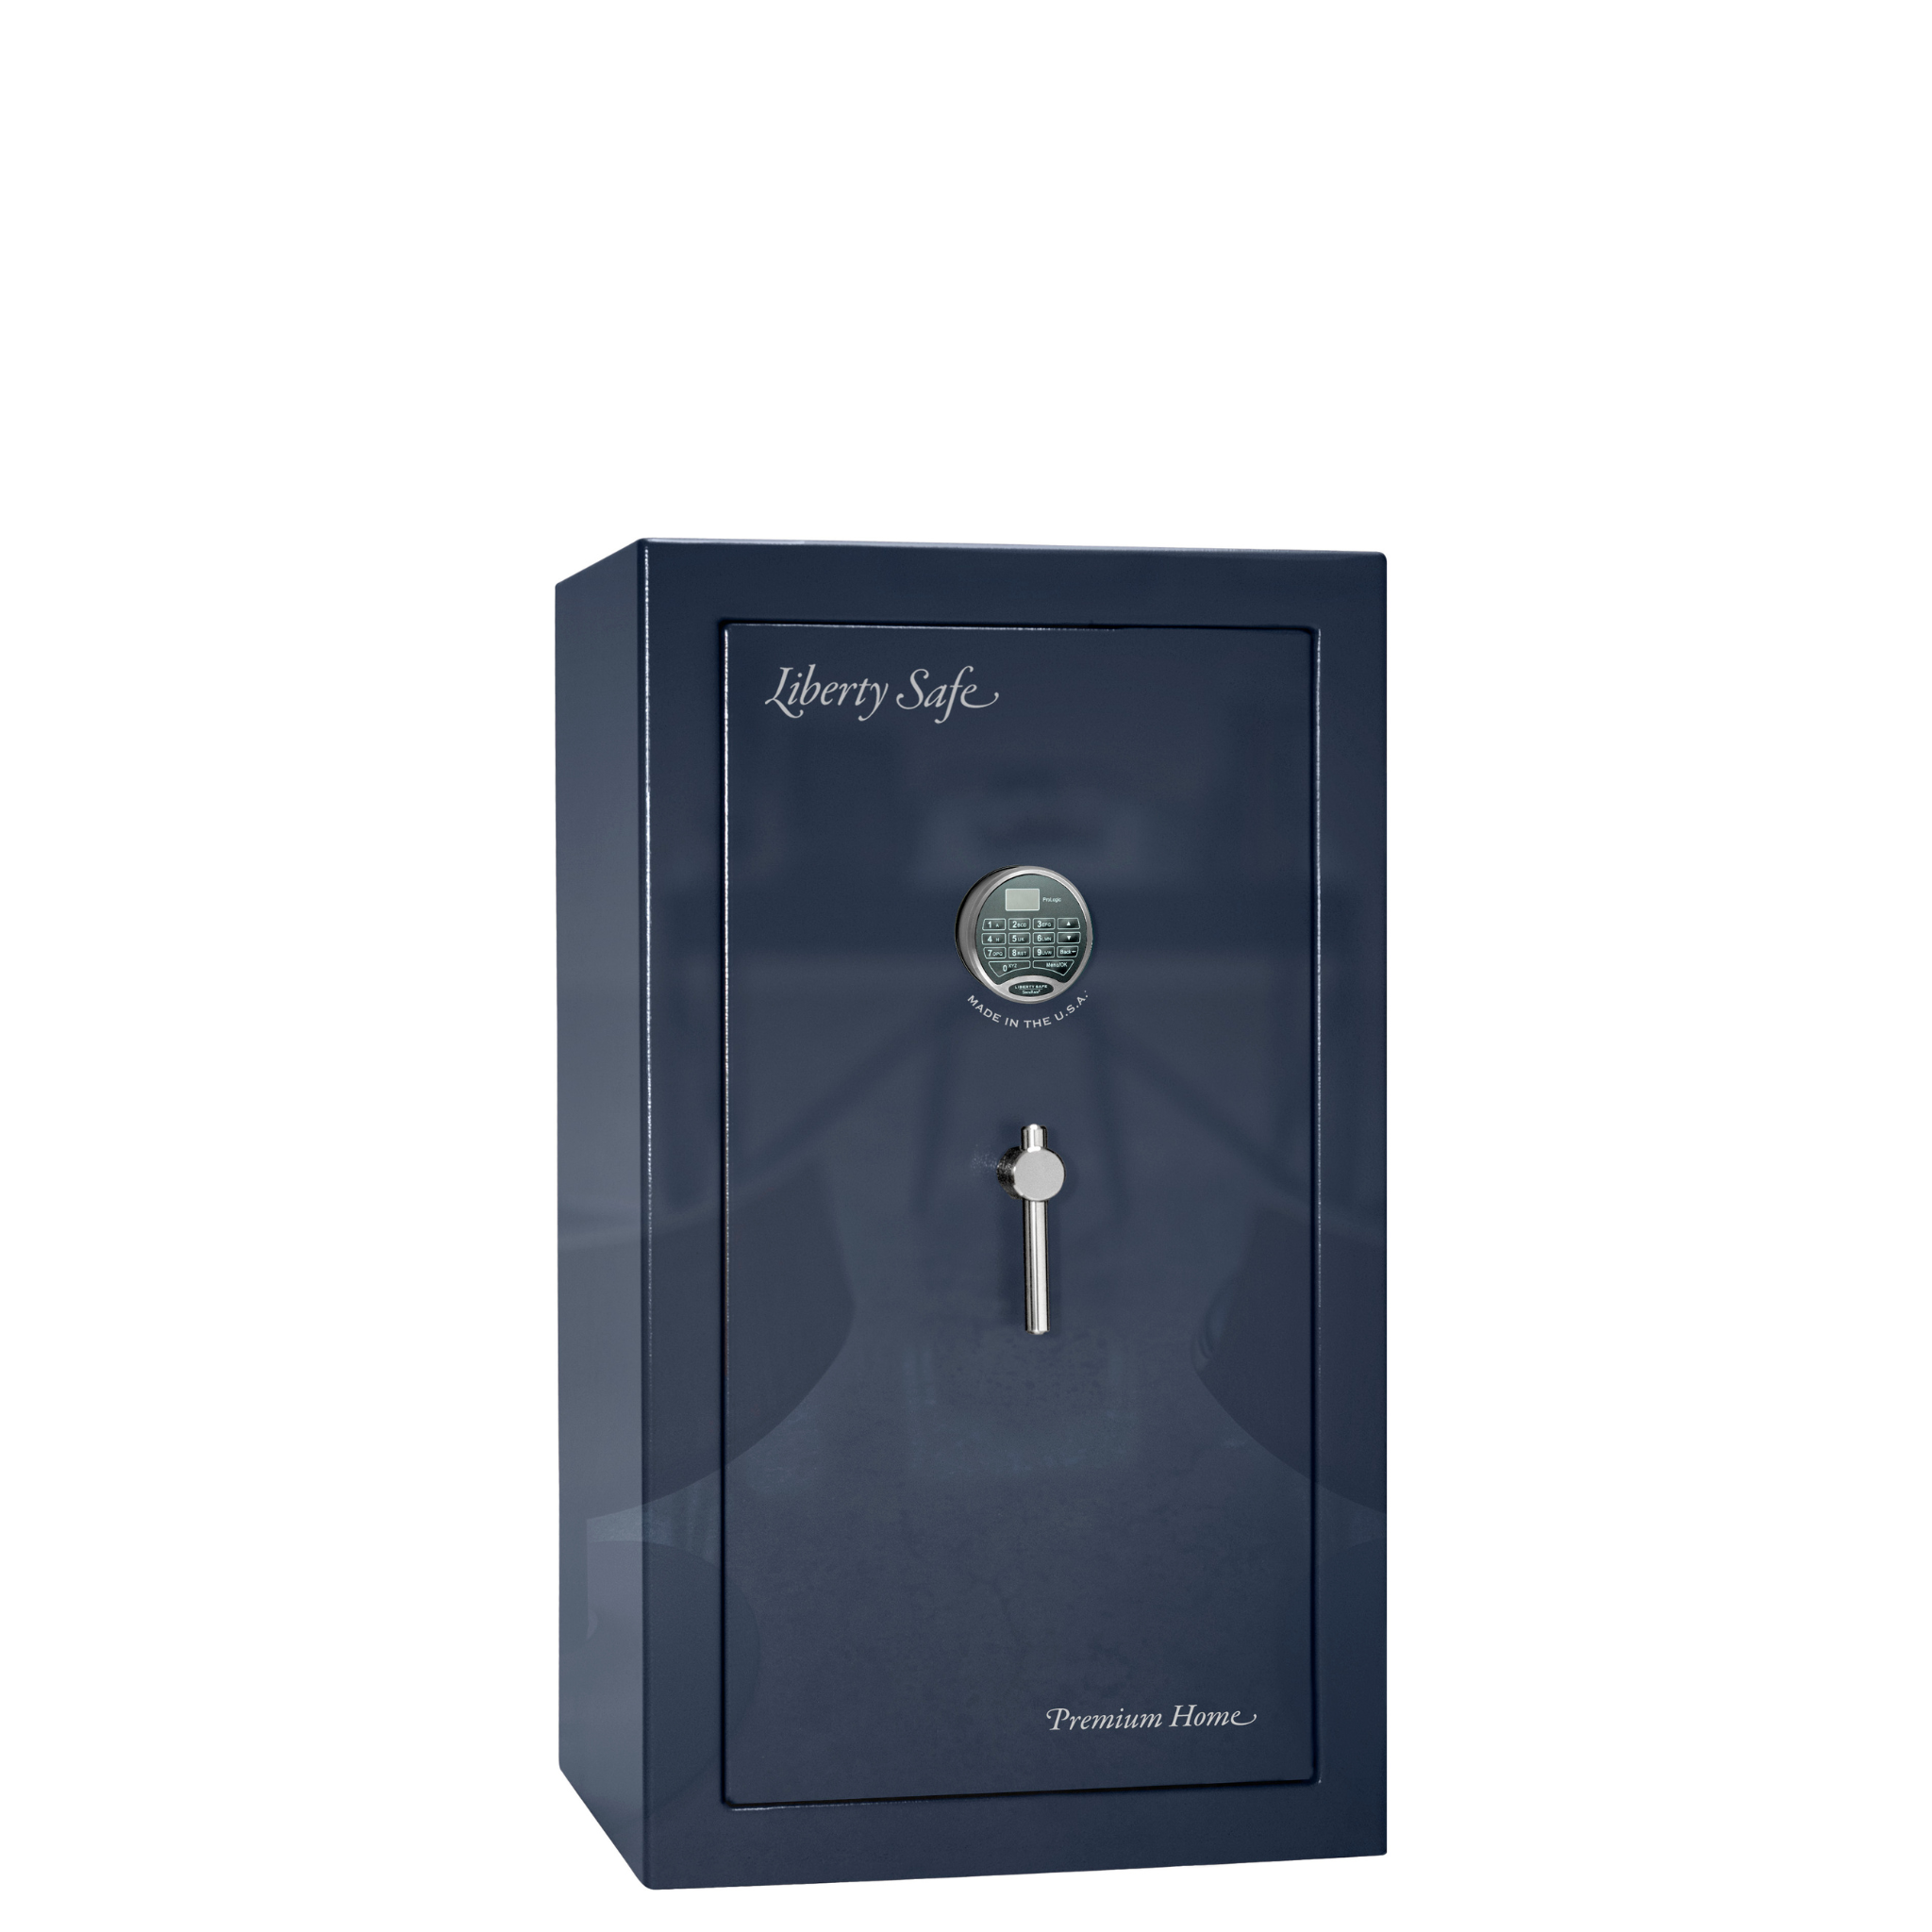 Premium Home Series | Level 7 Security | 2 Hour Fire Protection | 12 | Dimensions: 41.75"(H) x 24.5"(W) x 19"(D) | Blue Gloss - Closed Door